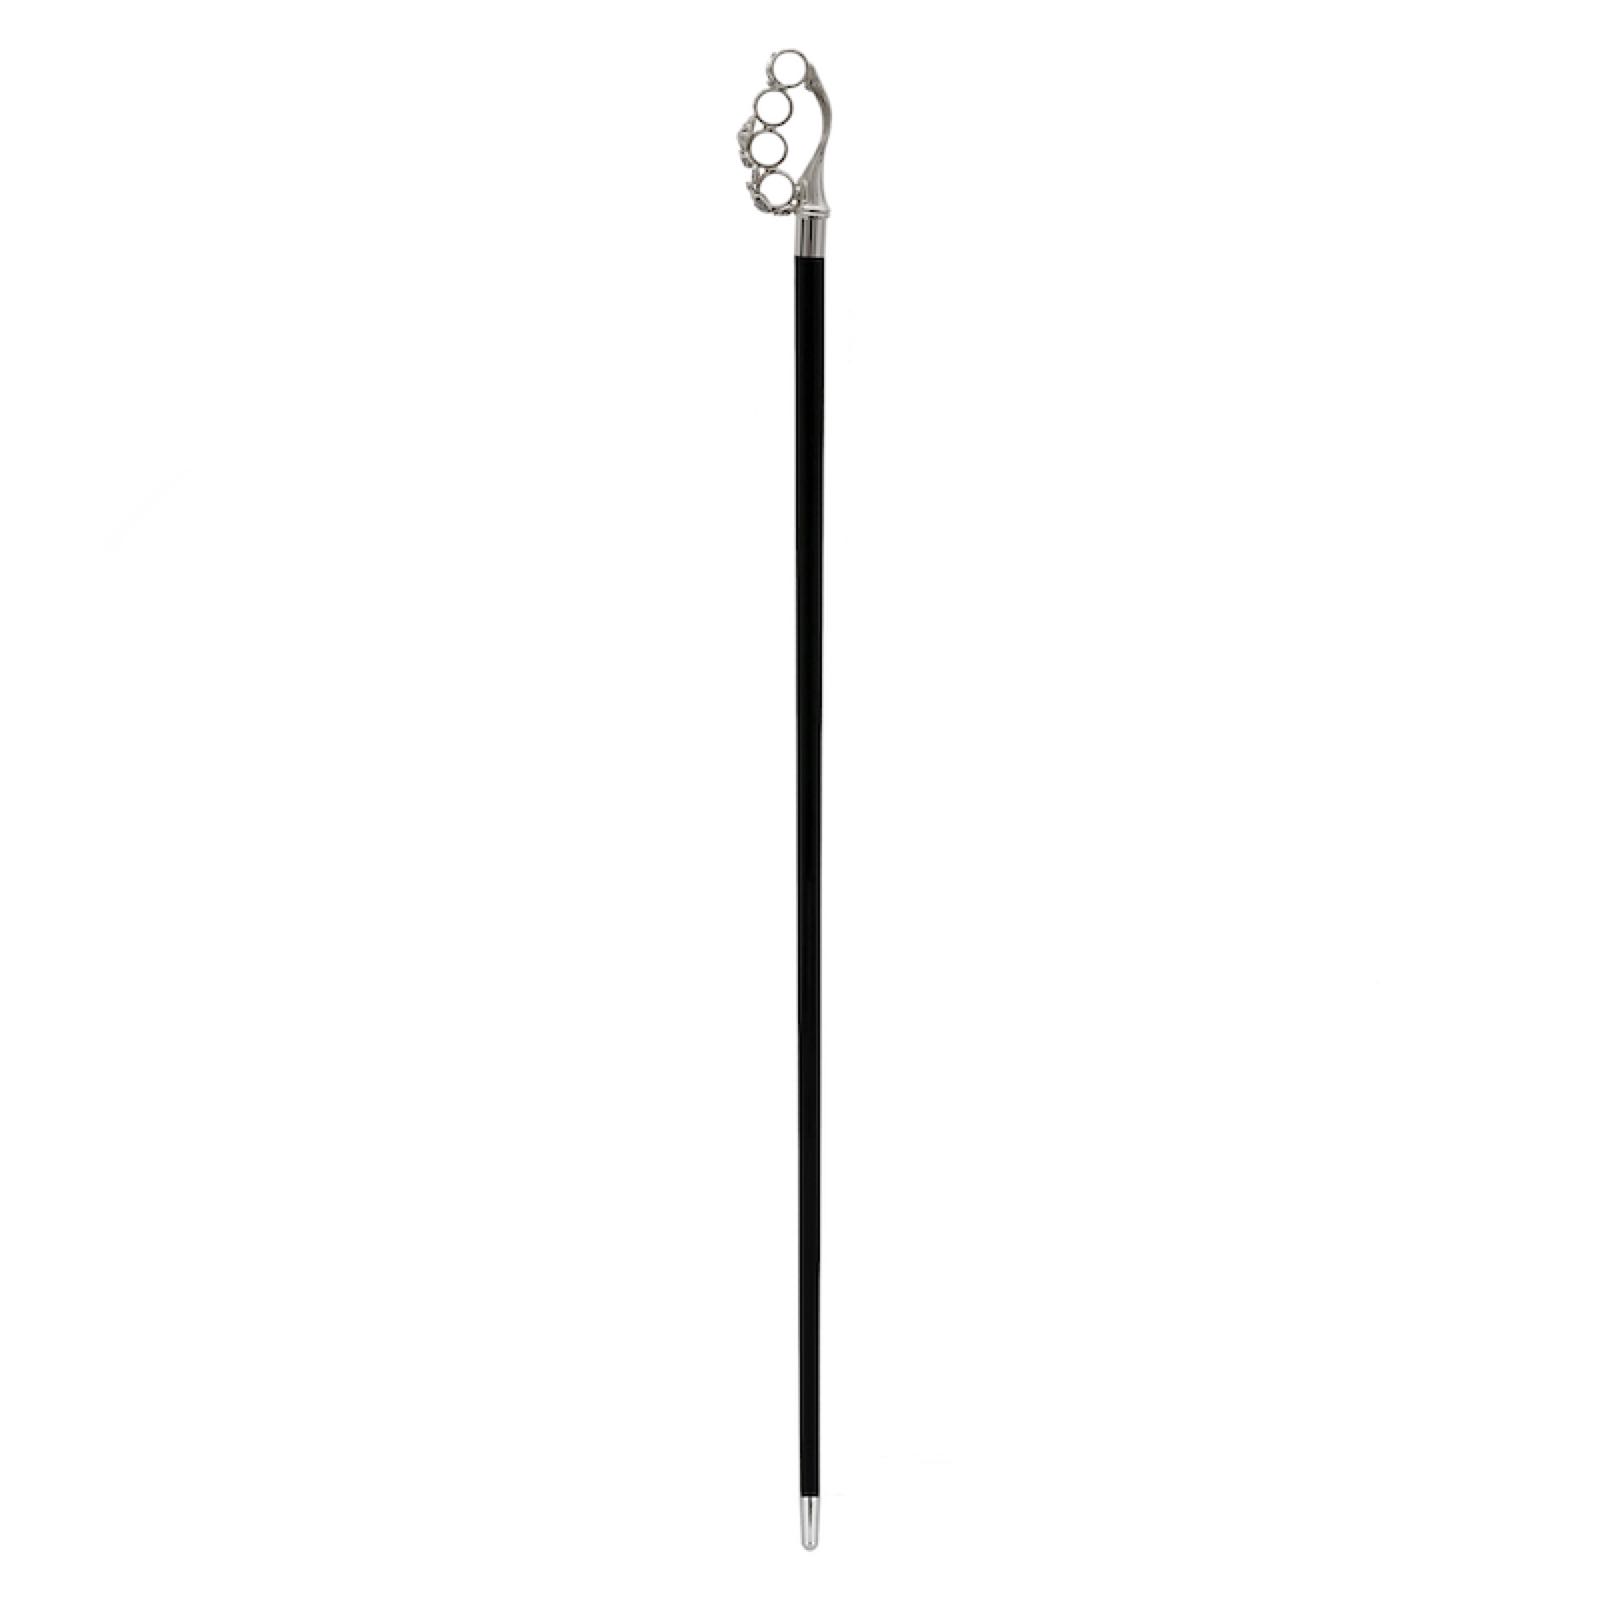 Luxury Walking Sticks and Canes with Silver Handles and Swarovski